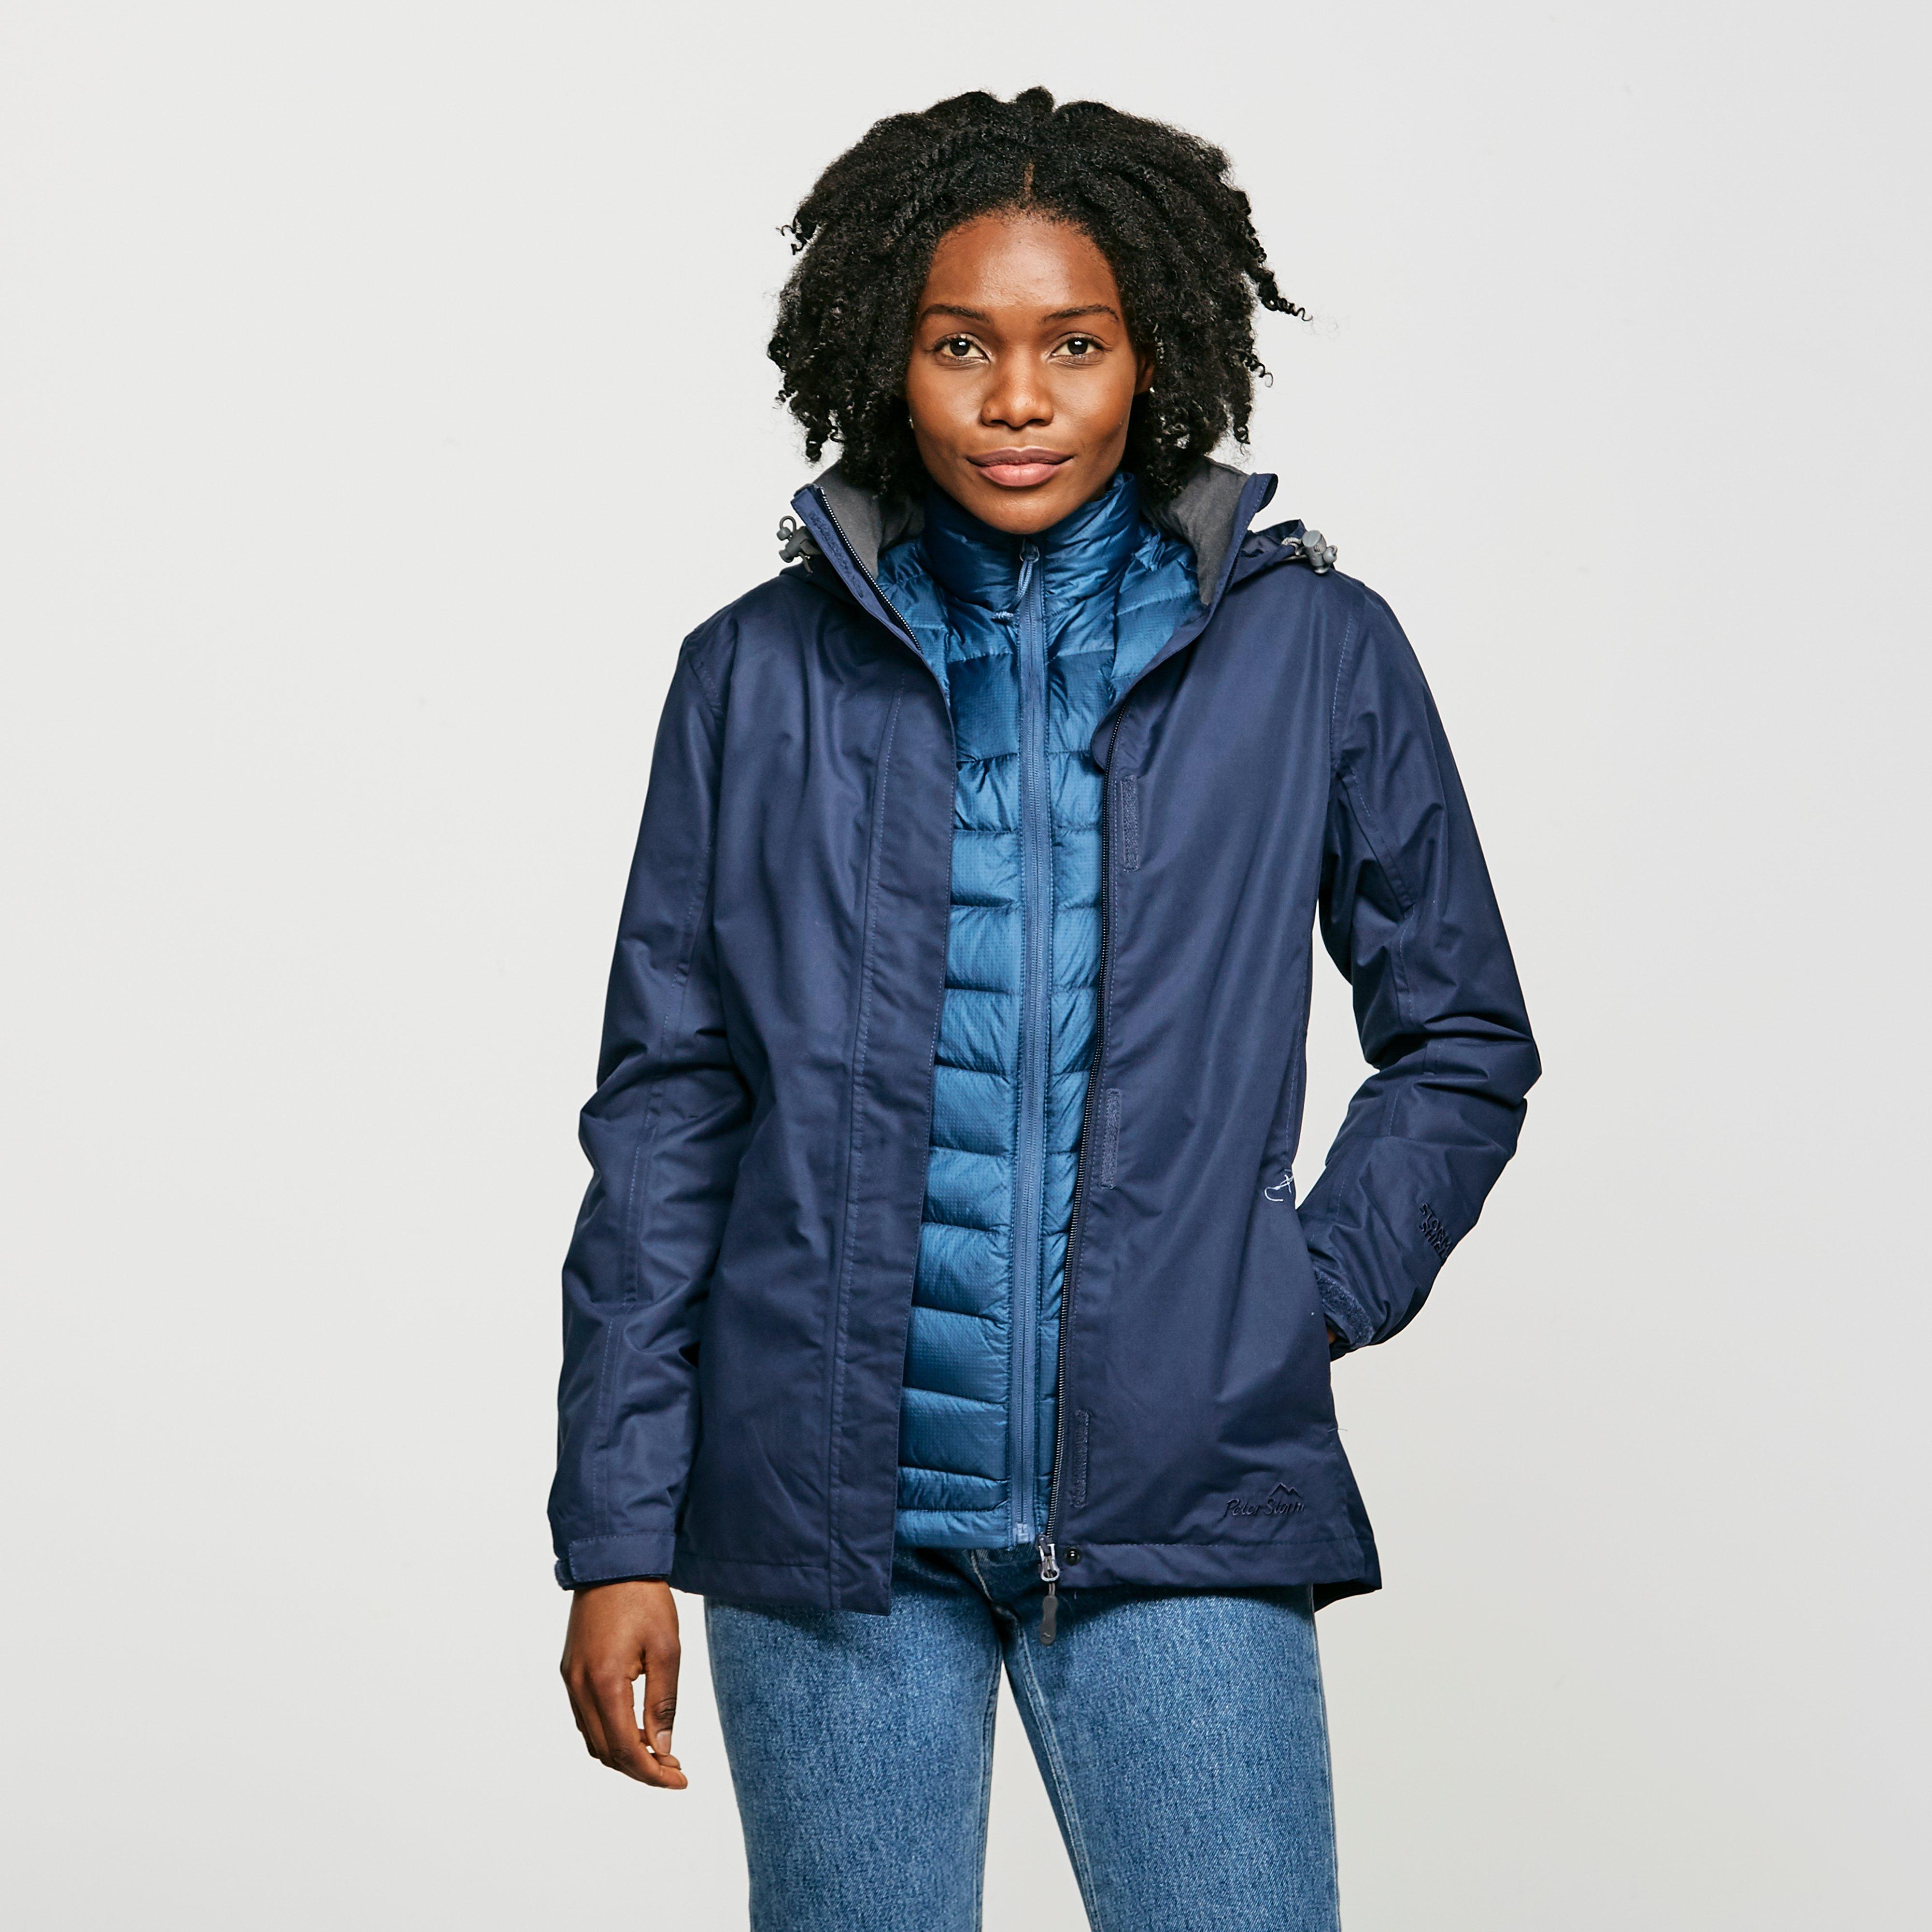 Peter Storm Womens Downpour Waterproof Jacket - Navy/nvy  Navy/nvy